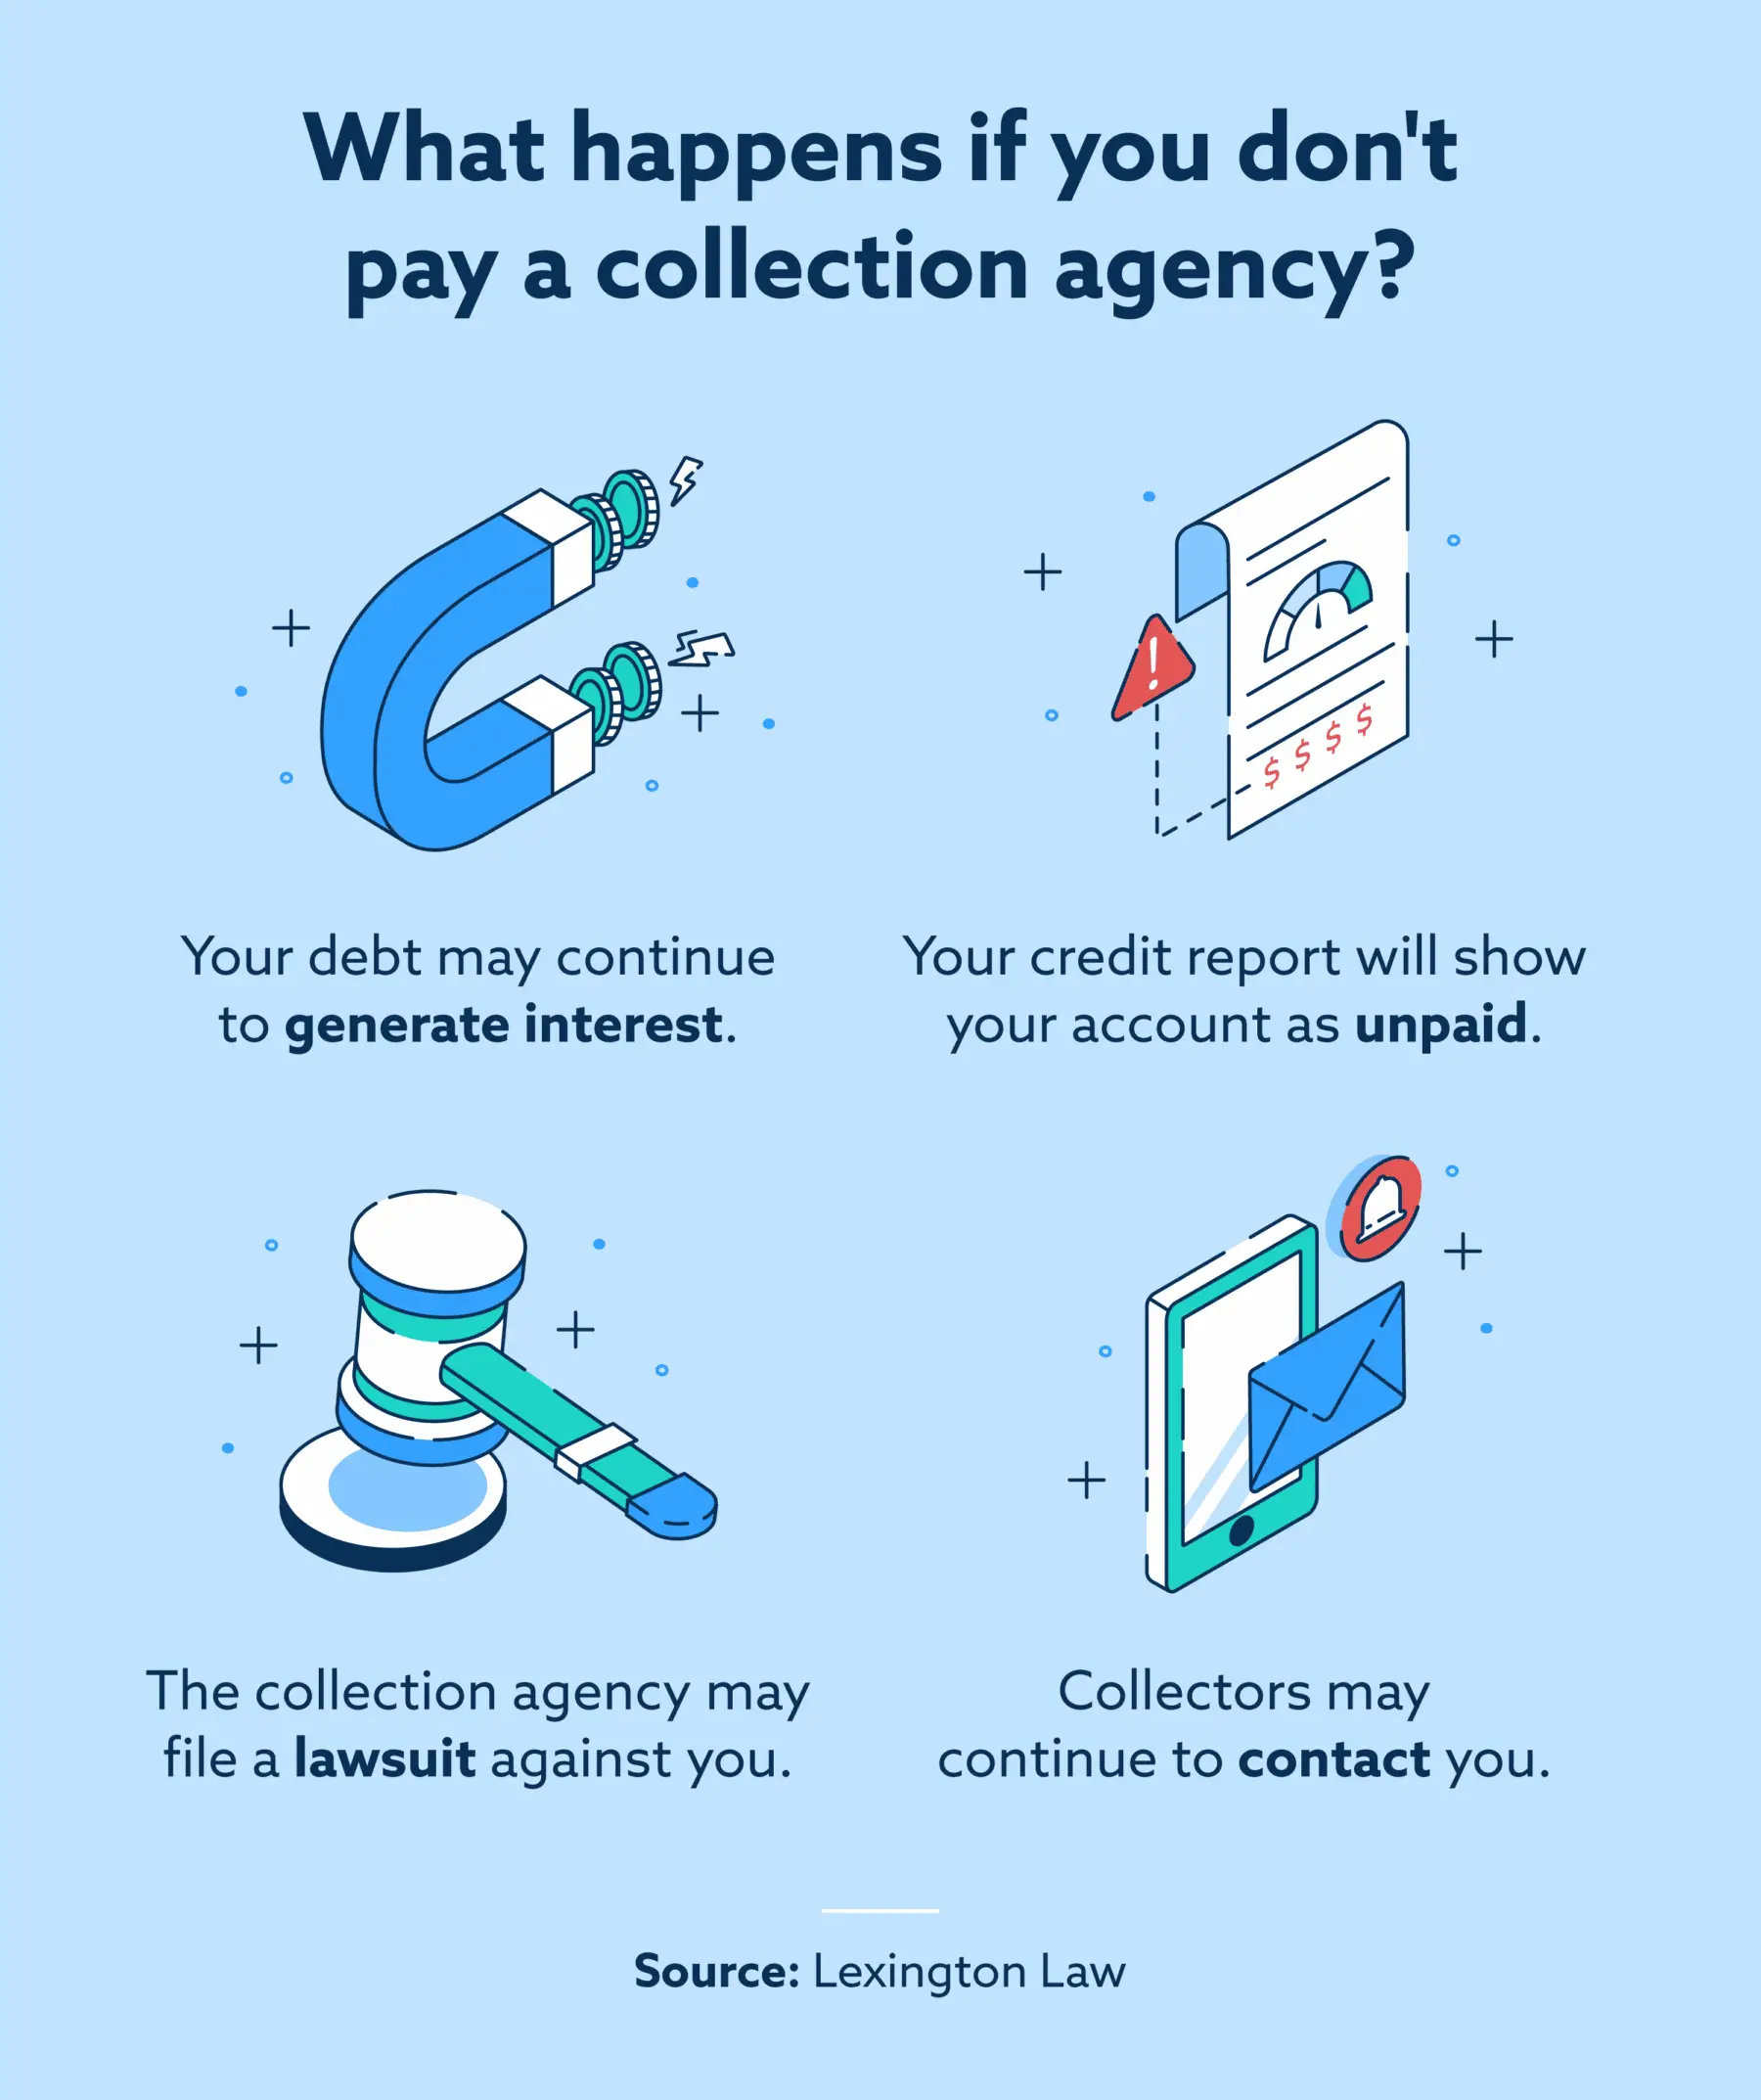 What happens if you donât pay a collection agency?